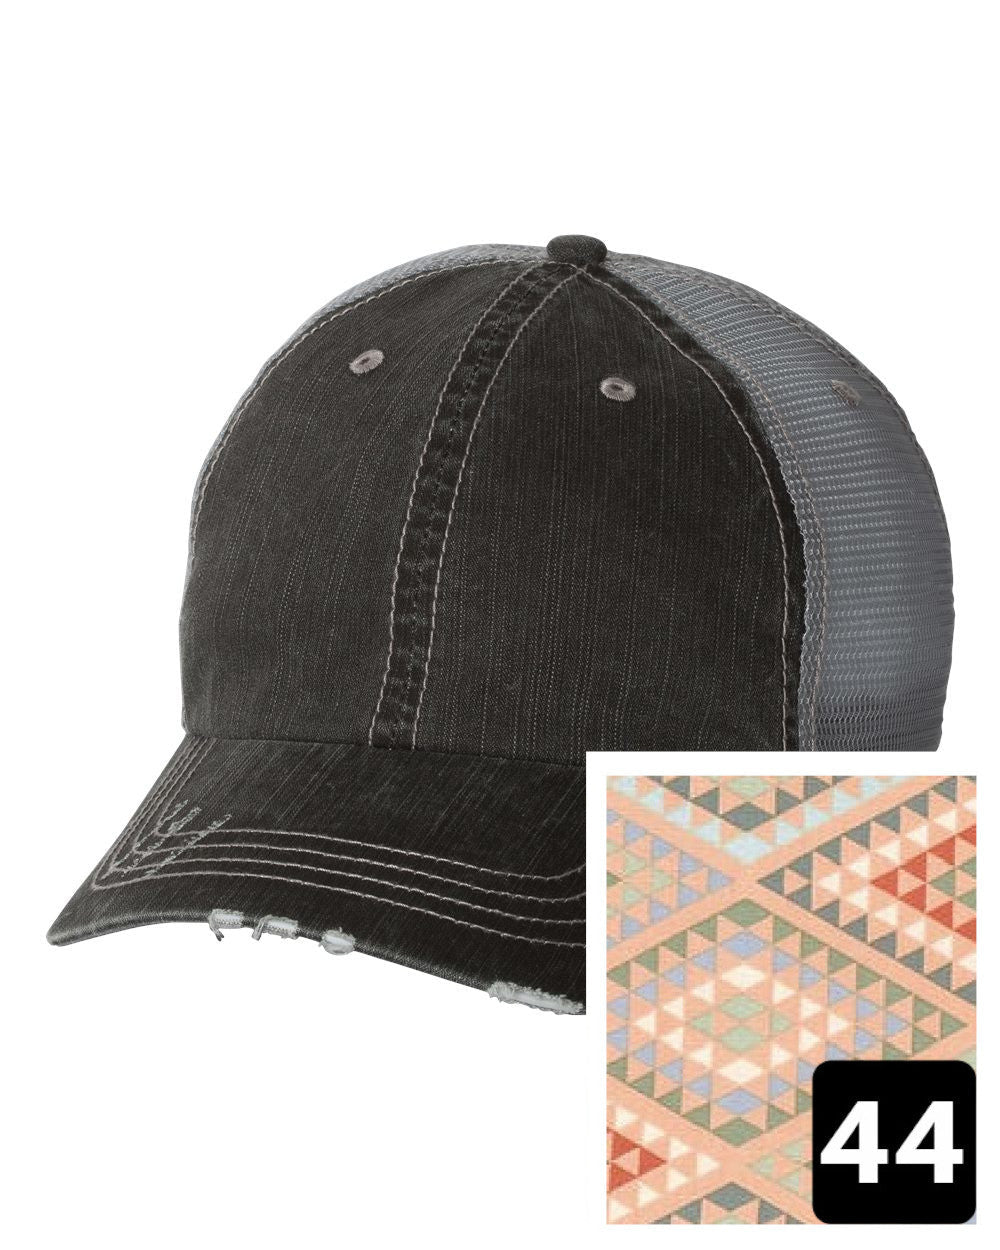 gray distressed trucker hat with navy coral and white chevron fabric state of Colorado